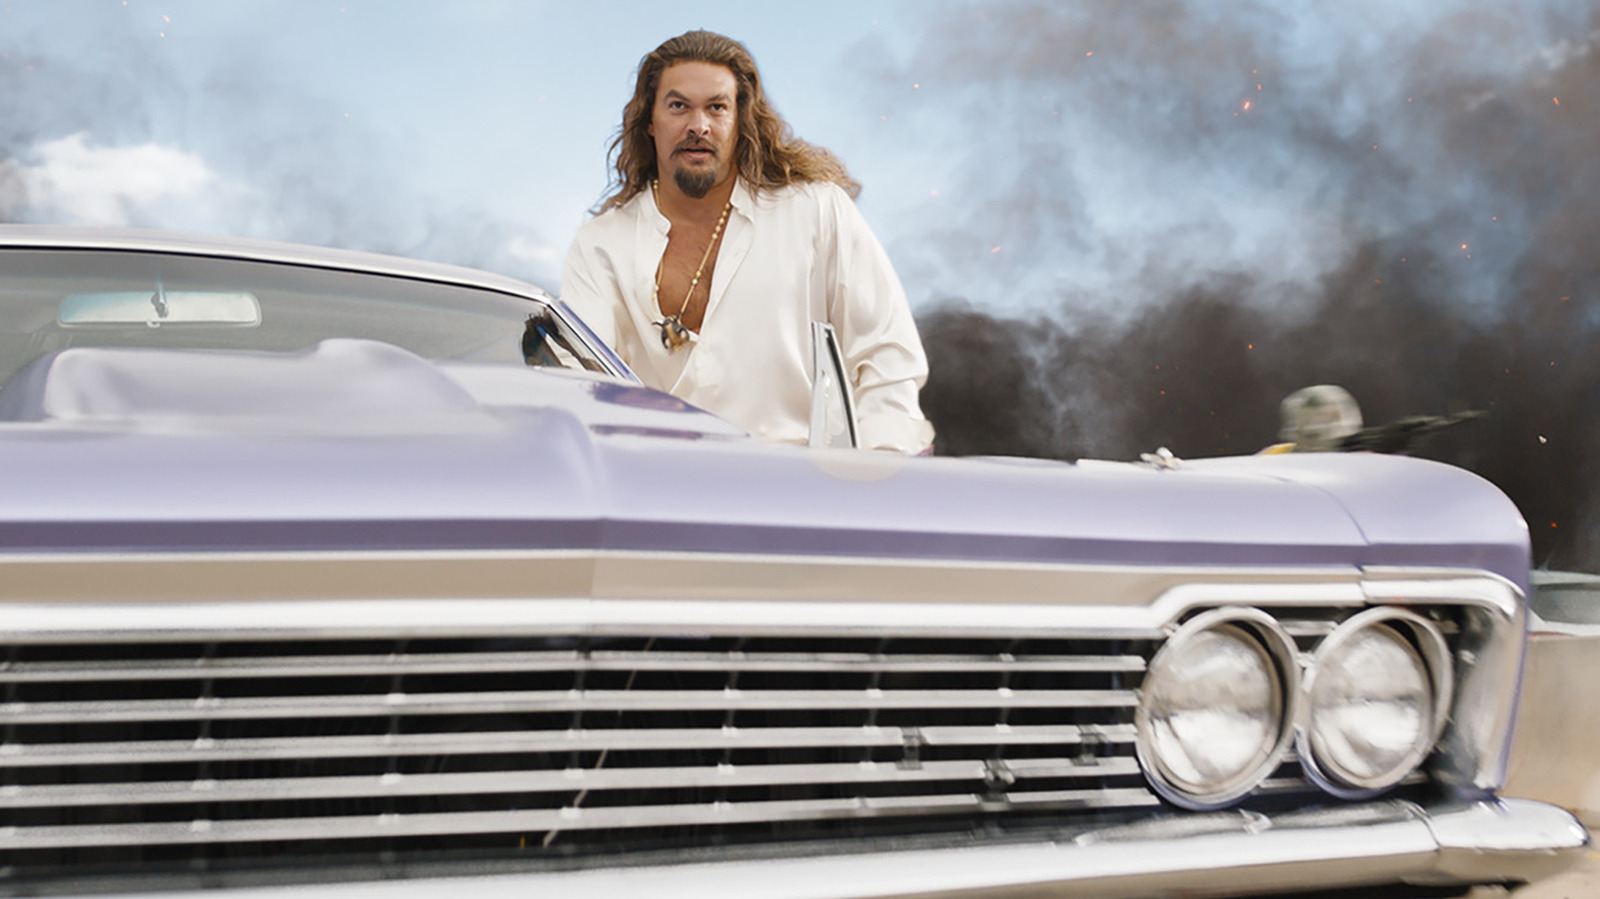 Fast X Review: Jason Momoa's Unhinged, Chaotic Villain Makes For ...